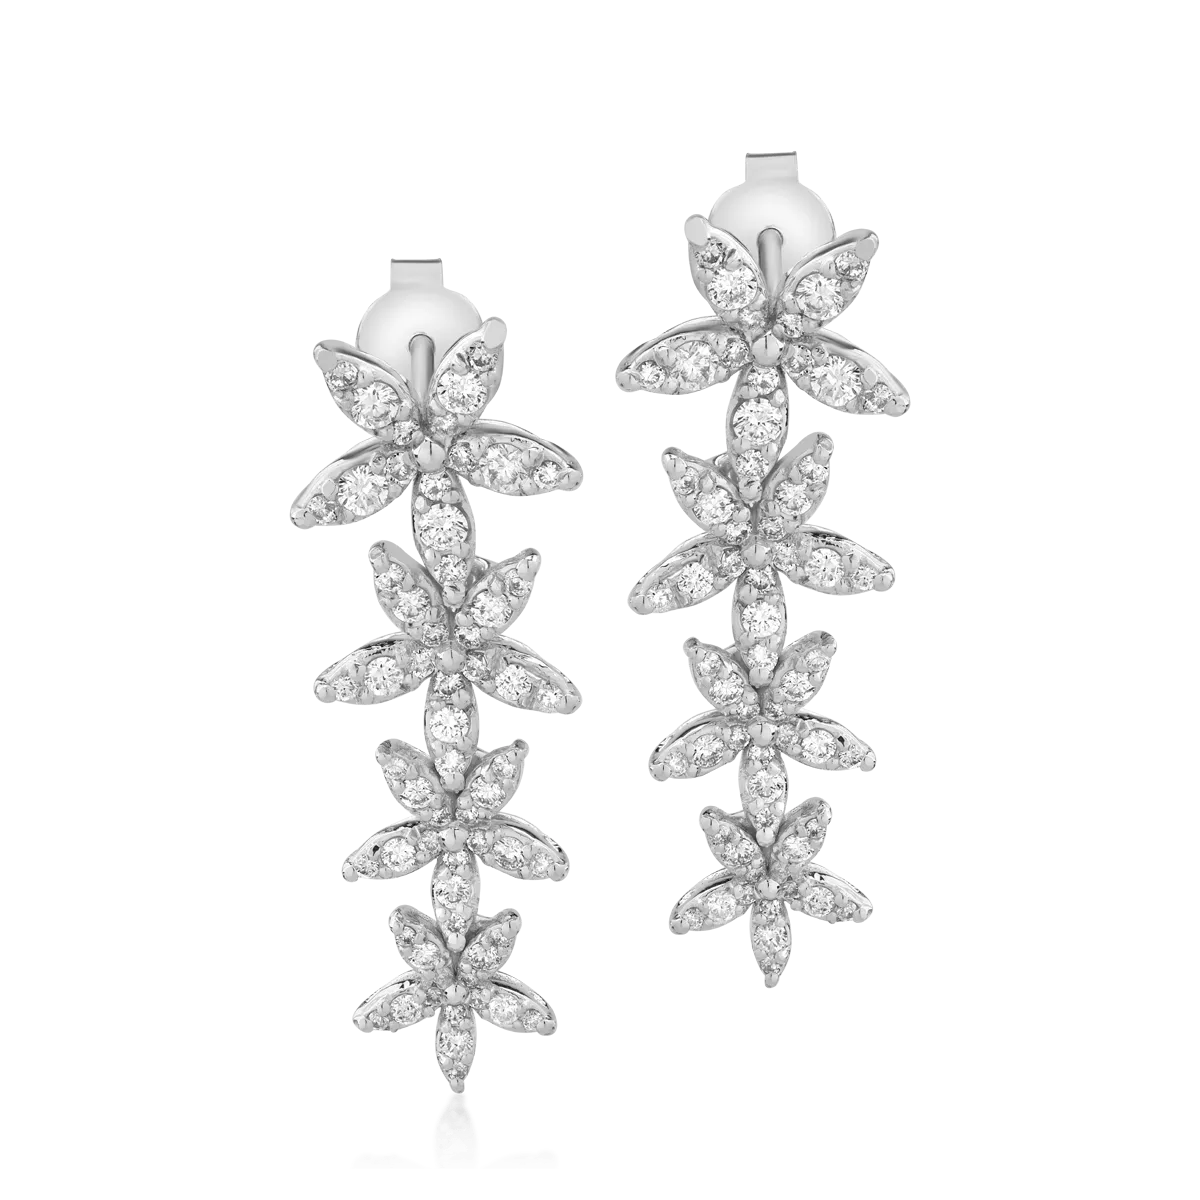 18K white gold earrings with 1.11ct diamonds